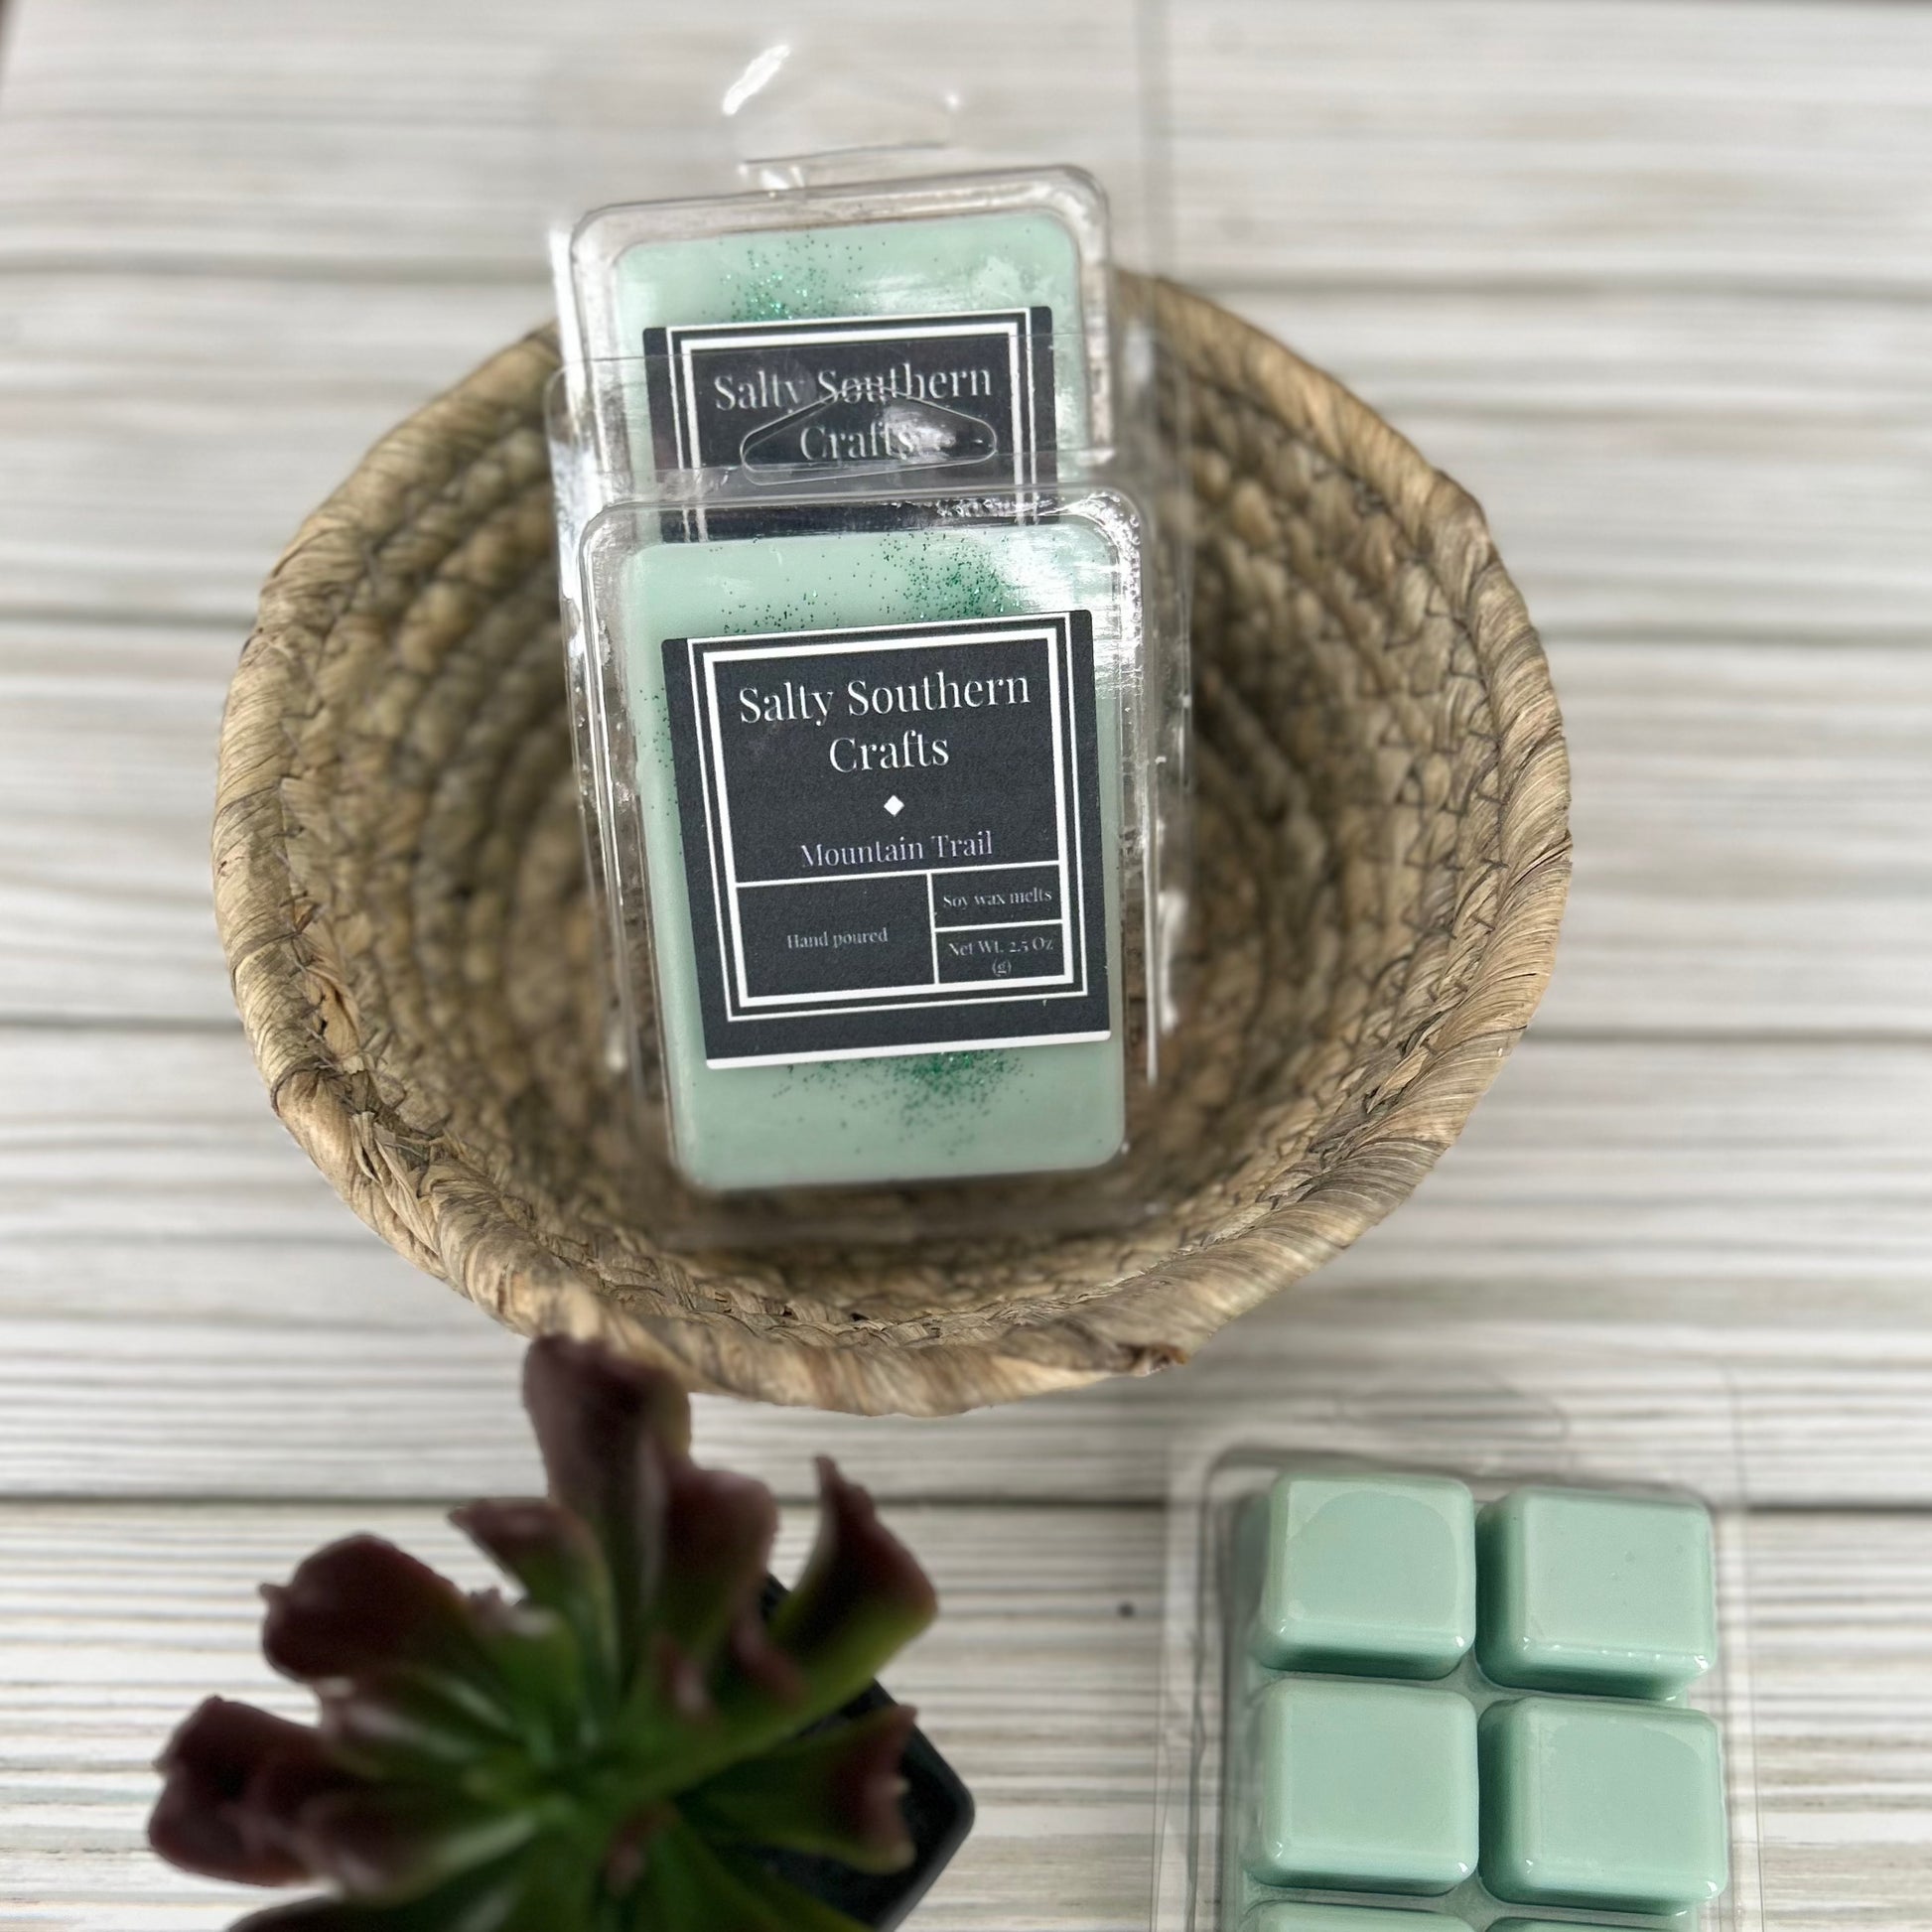 Soy wax melt scented with mountain trail